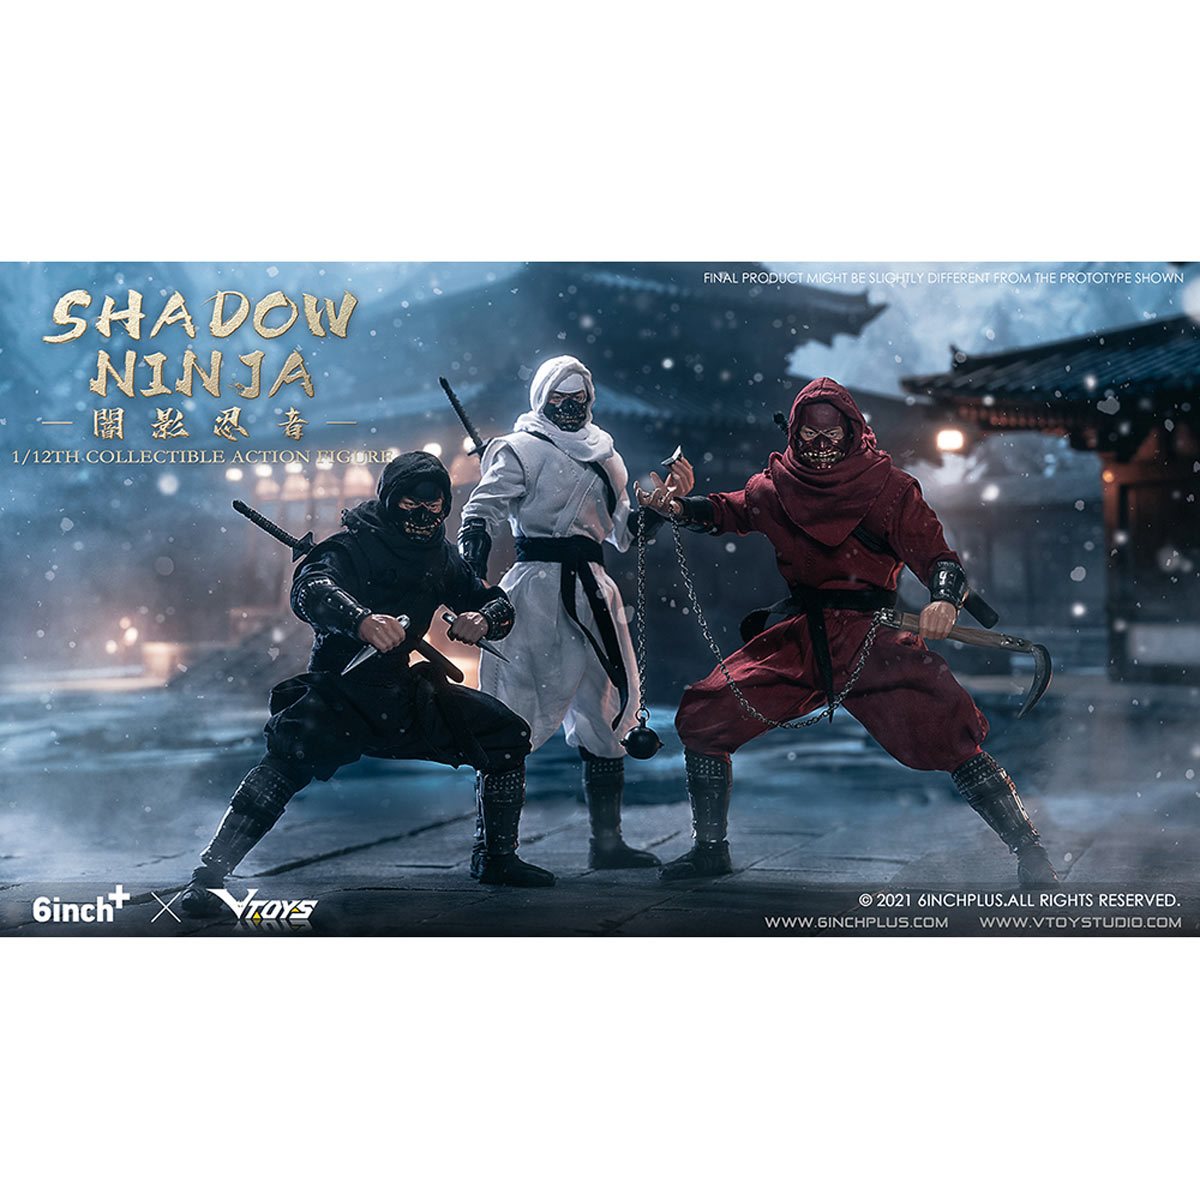 VTOYS X 6INCH Red Shadow Ninja SN002 1:12 Scale Action Figure